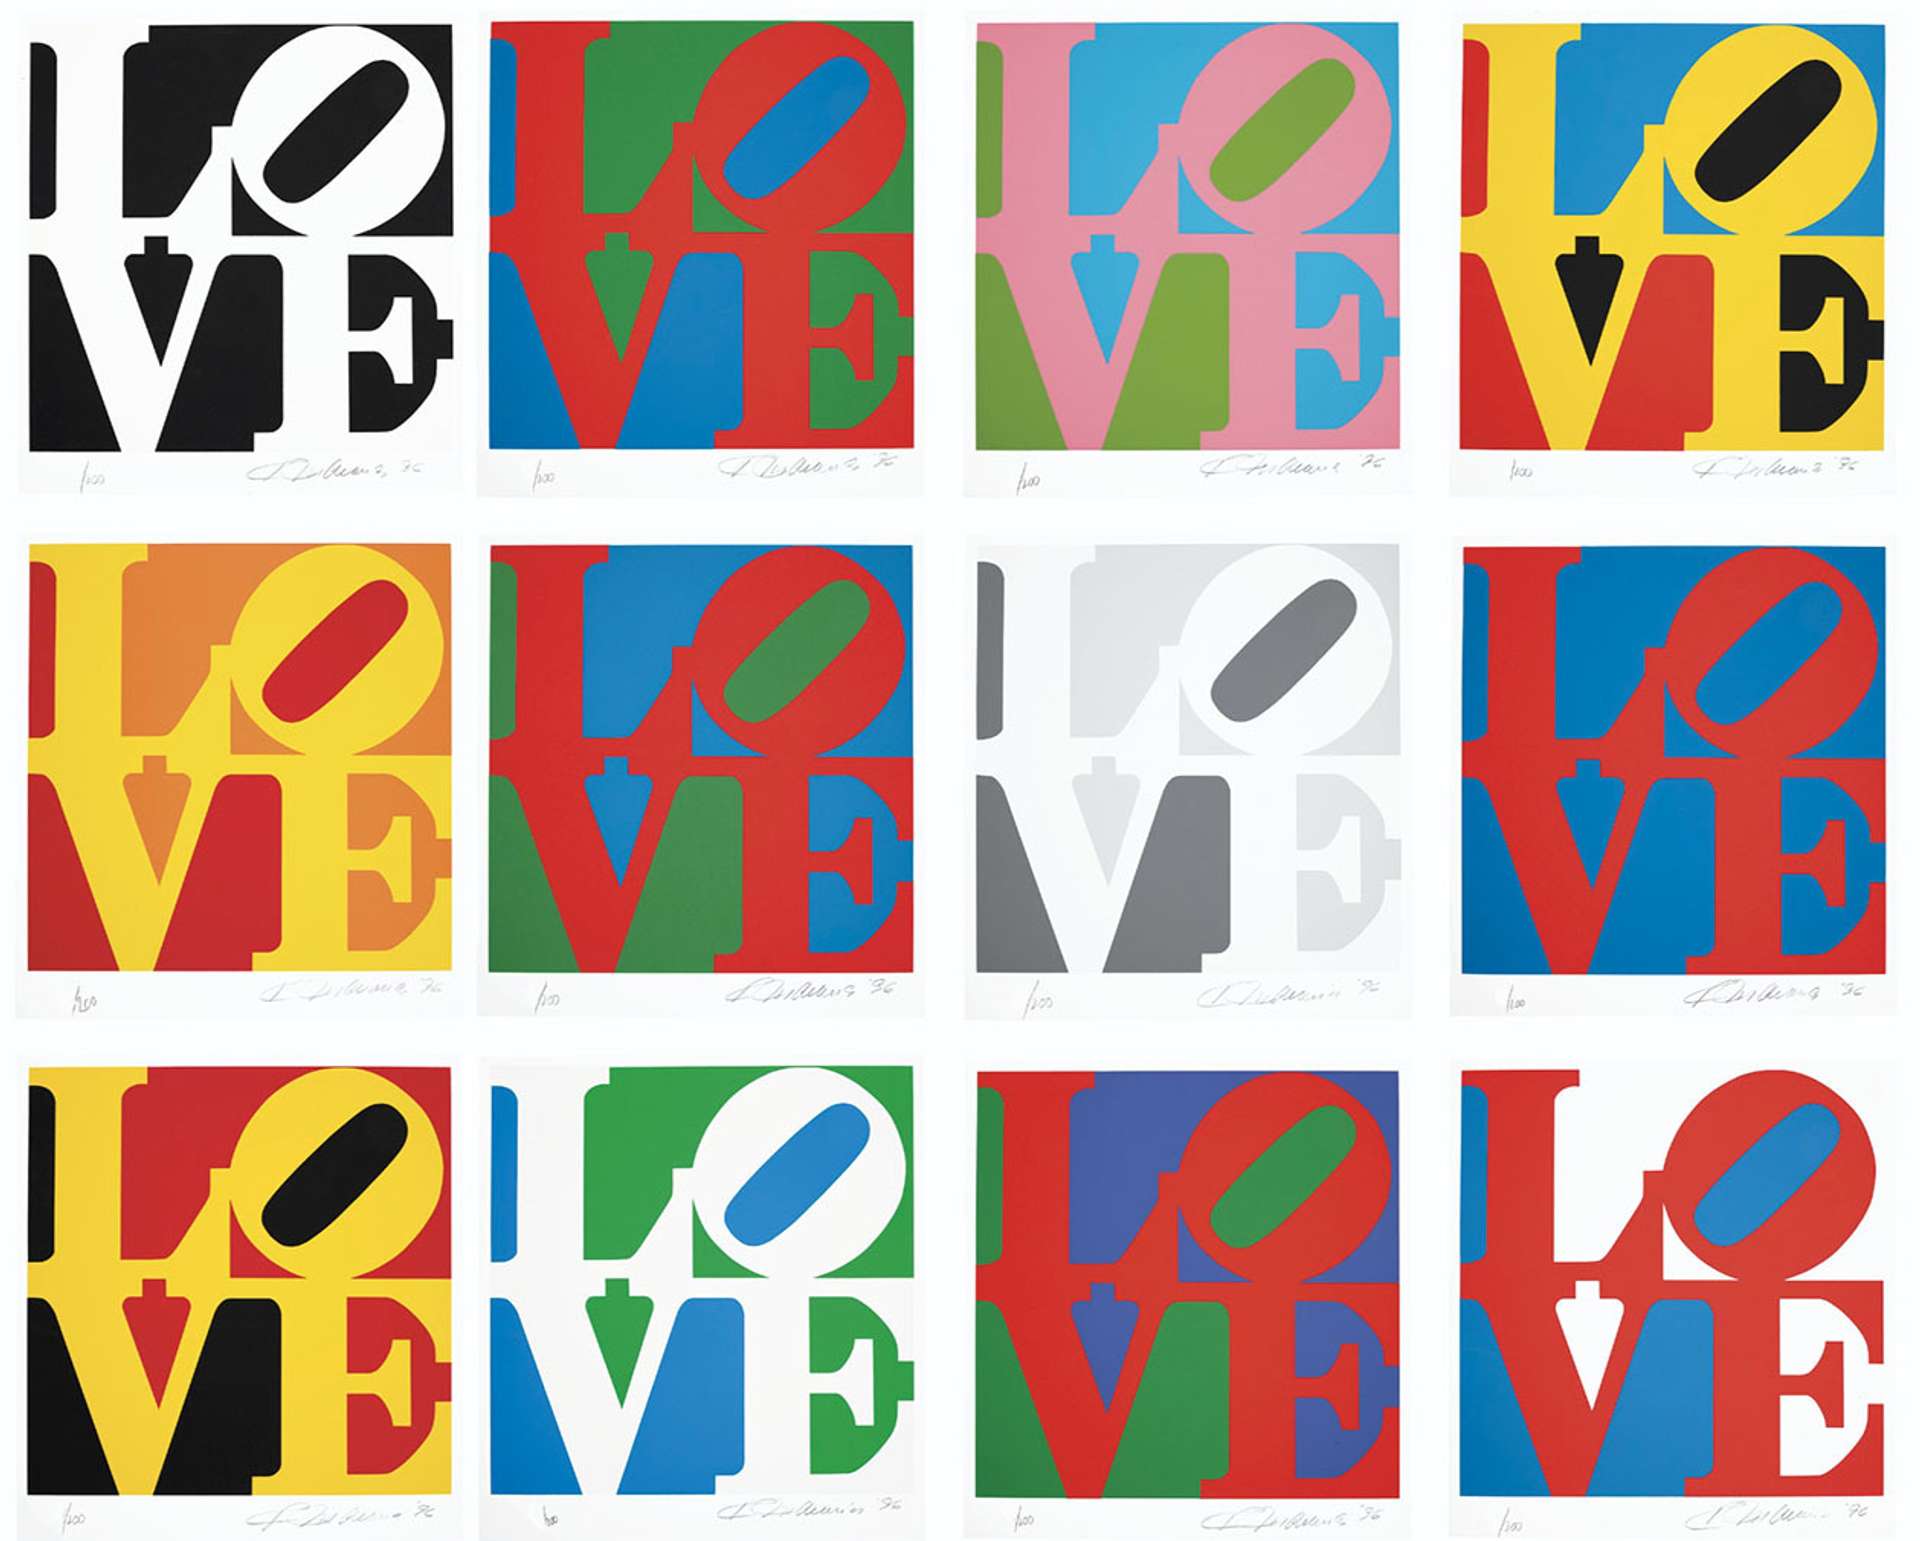 A series of 12 screenprints by Robert Indiana depicting the word “LOVE” in various colour-ways.